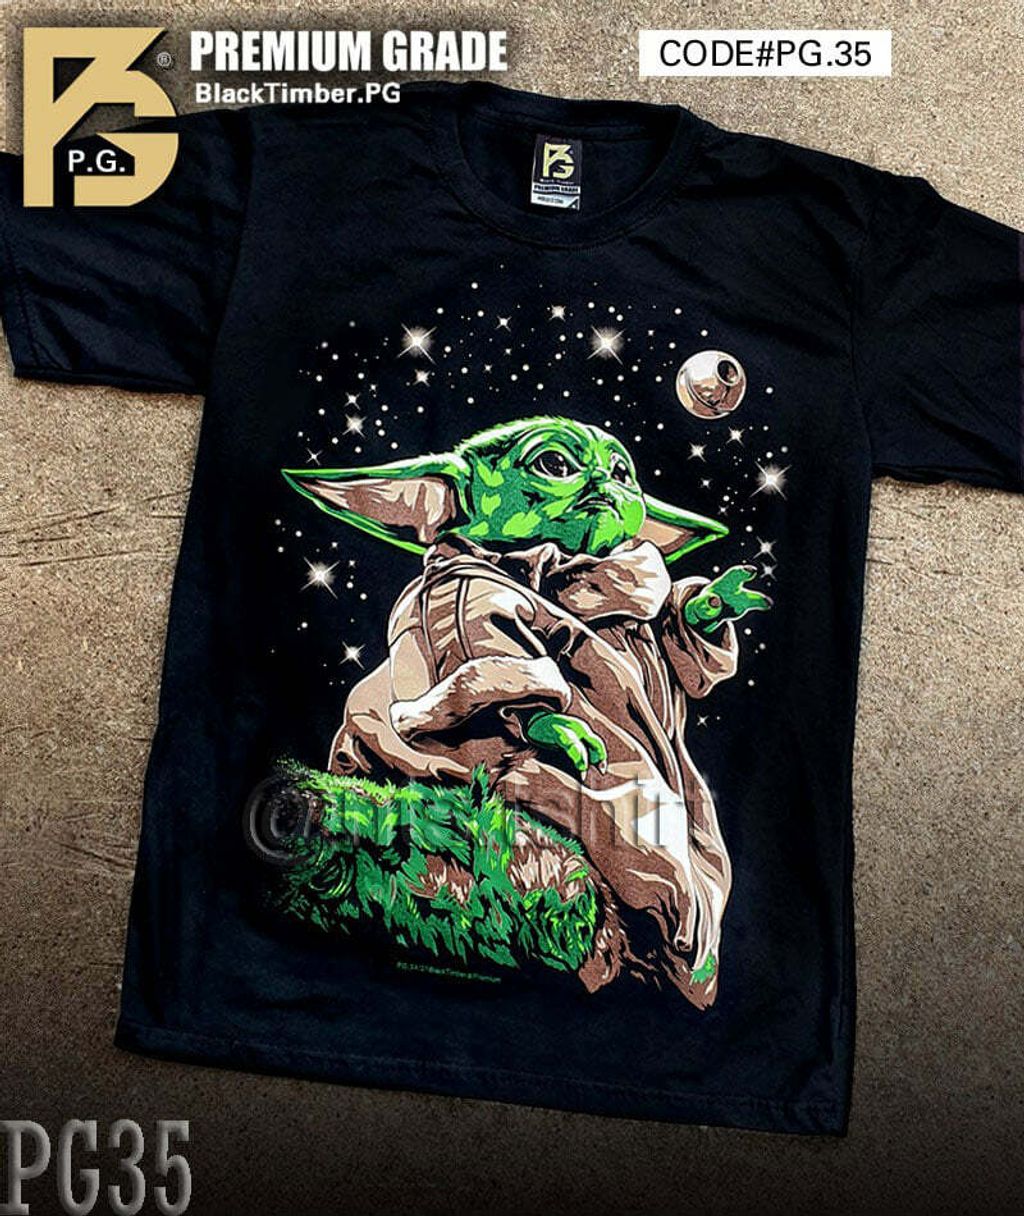 PG35 STAR WARS BABY SPEED T-SHIRT GRADE COLLECTABLE YODA BLACK ORIGINAL TIMBER SPECIAL HIGH MANDALORIAN COLLECTION PREMIUM BLACK T-SHIRT TIMBER PREMIUM TYPE SCREEN COTTON SYSTEM NEW SILK MOAI GRADE QUALITY MOVIE –